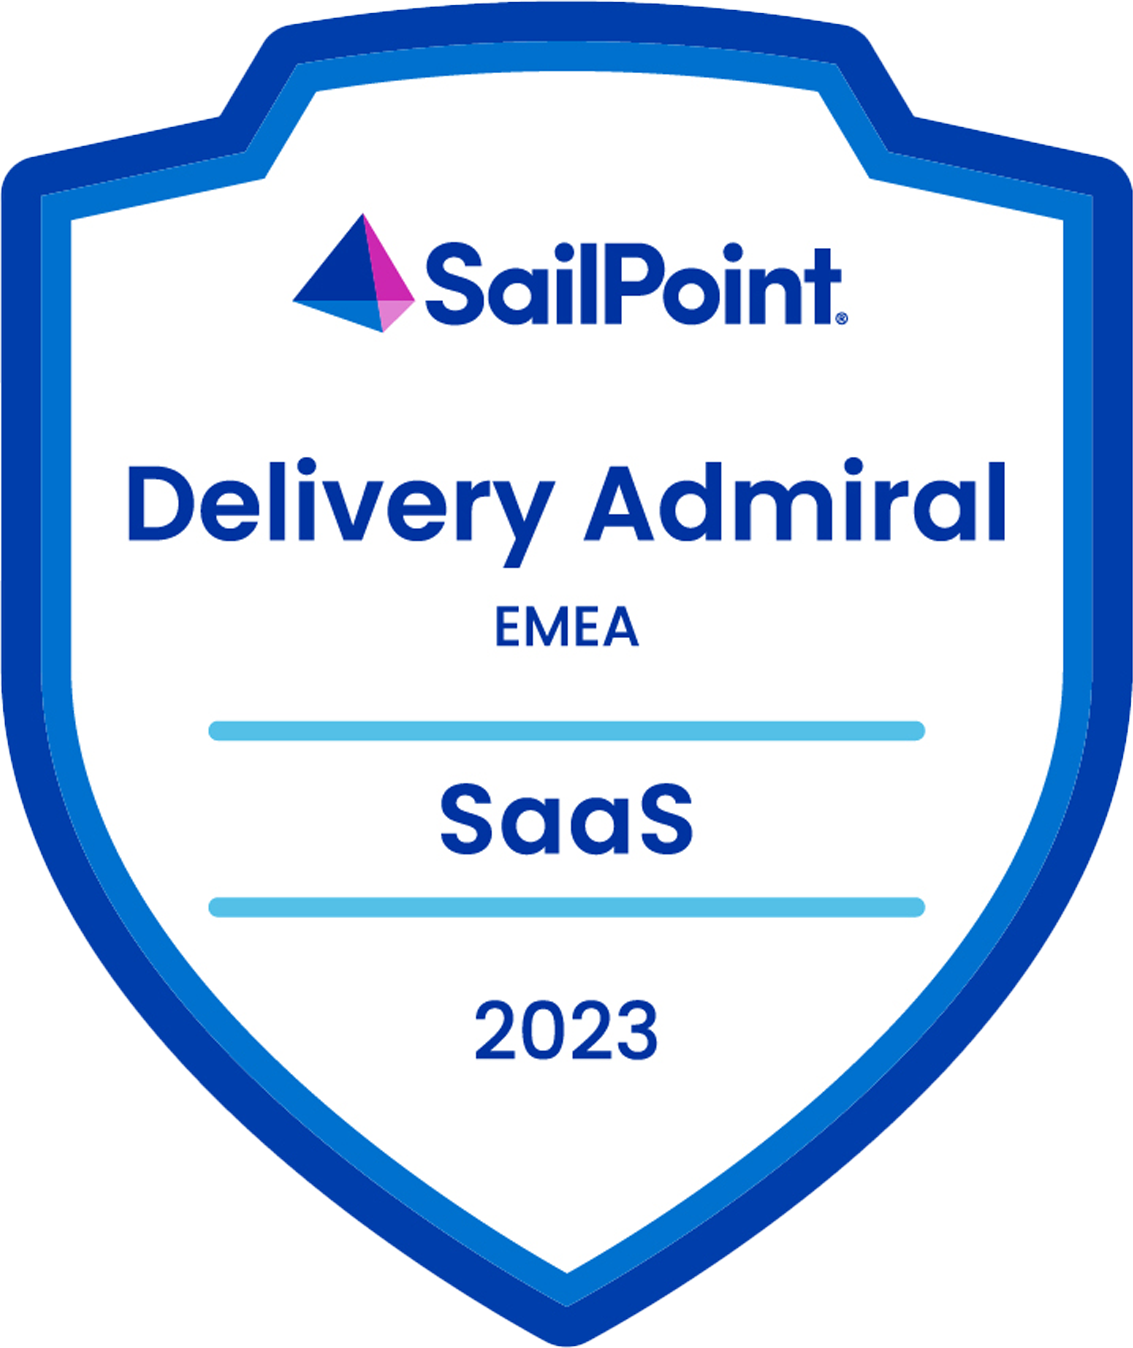 SailPoint Delivery Admiral